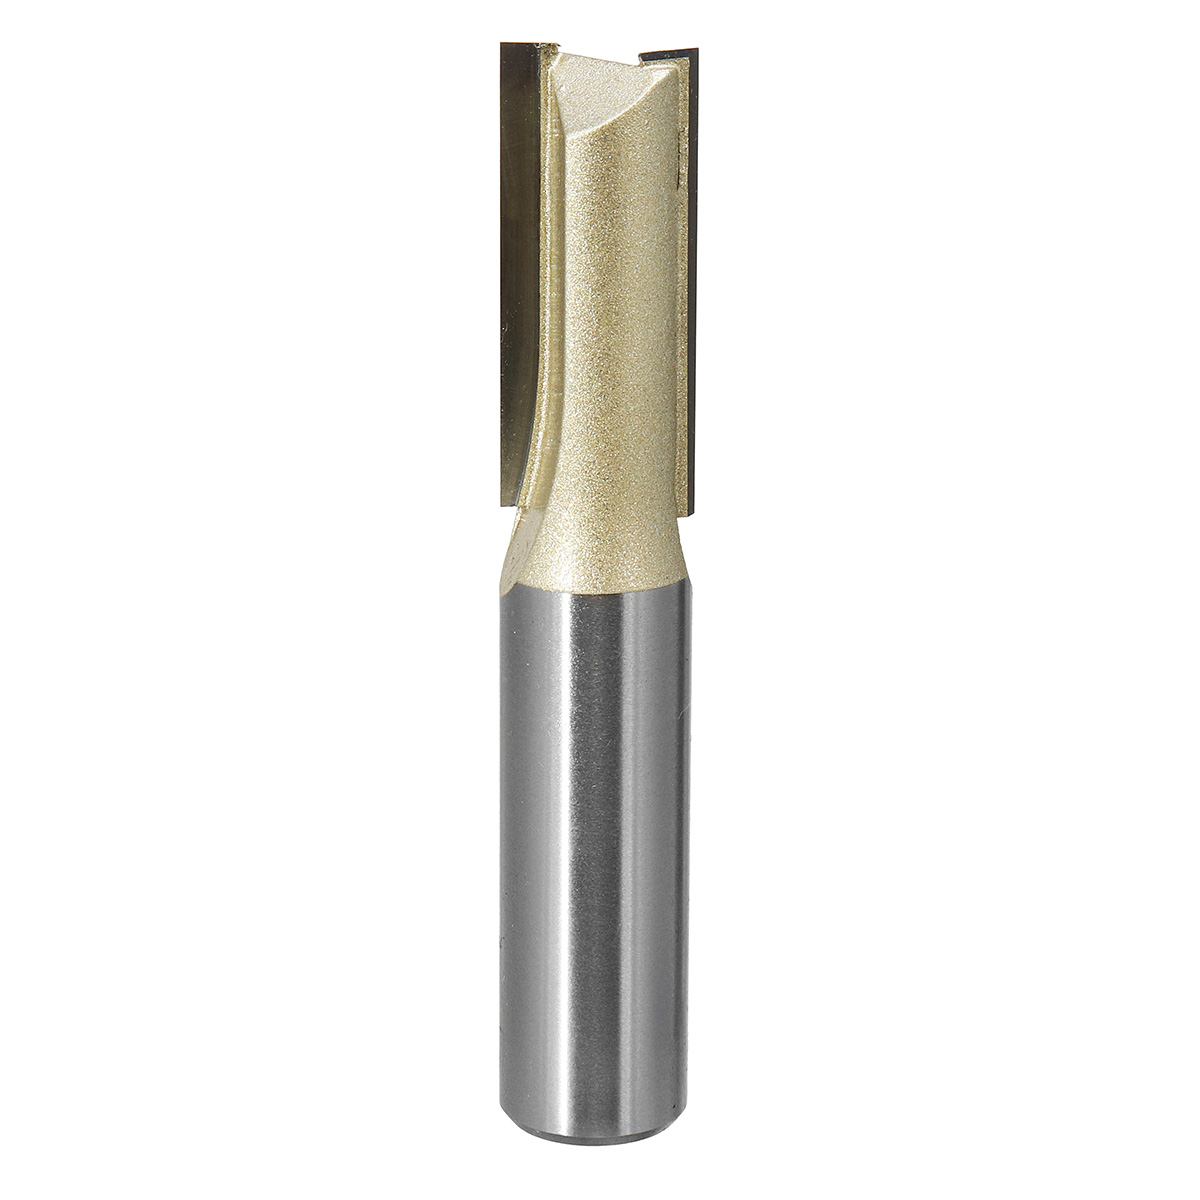 12-Inch-Straight-Shank-Double-Flute-Router-Bit-1214-1238-1212-Slot-Cutter-1385393-3